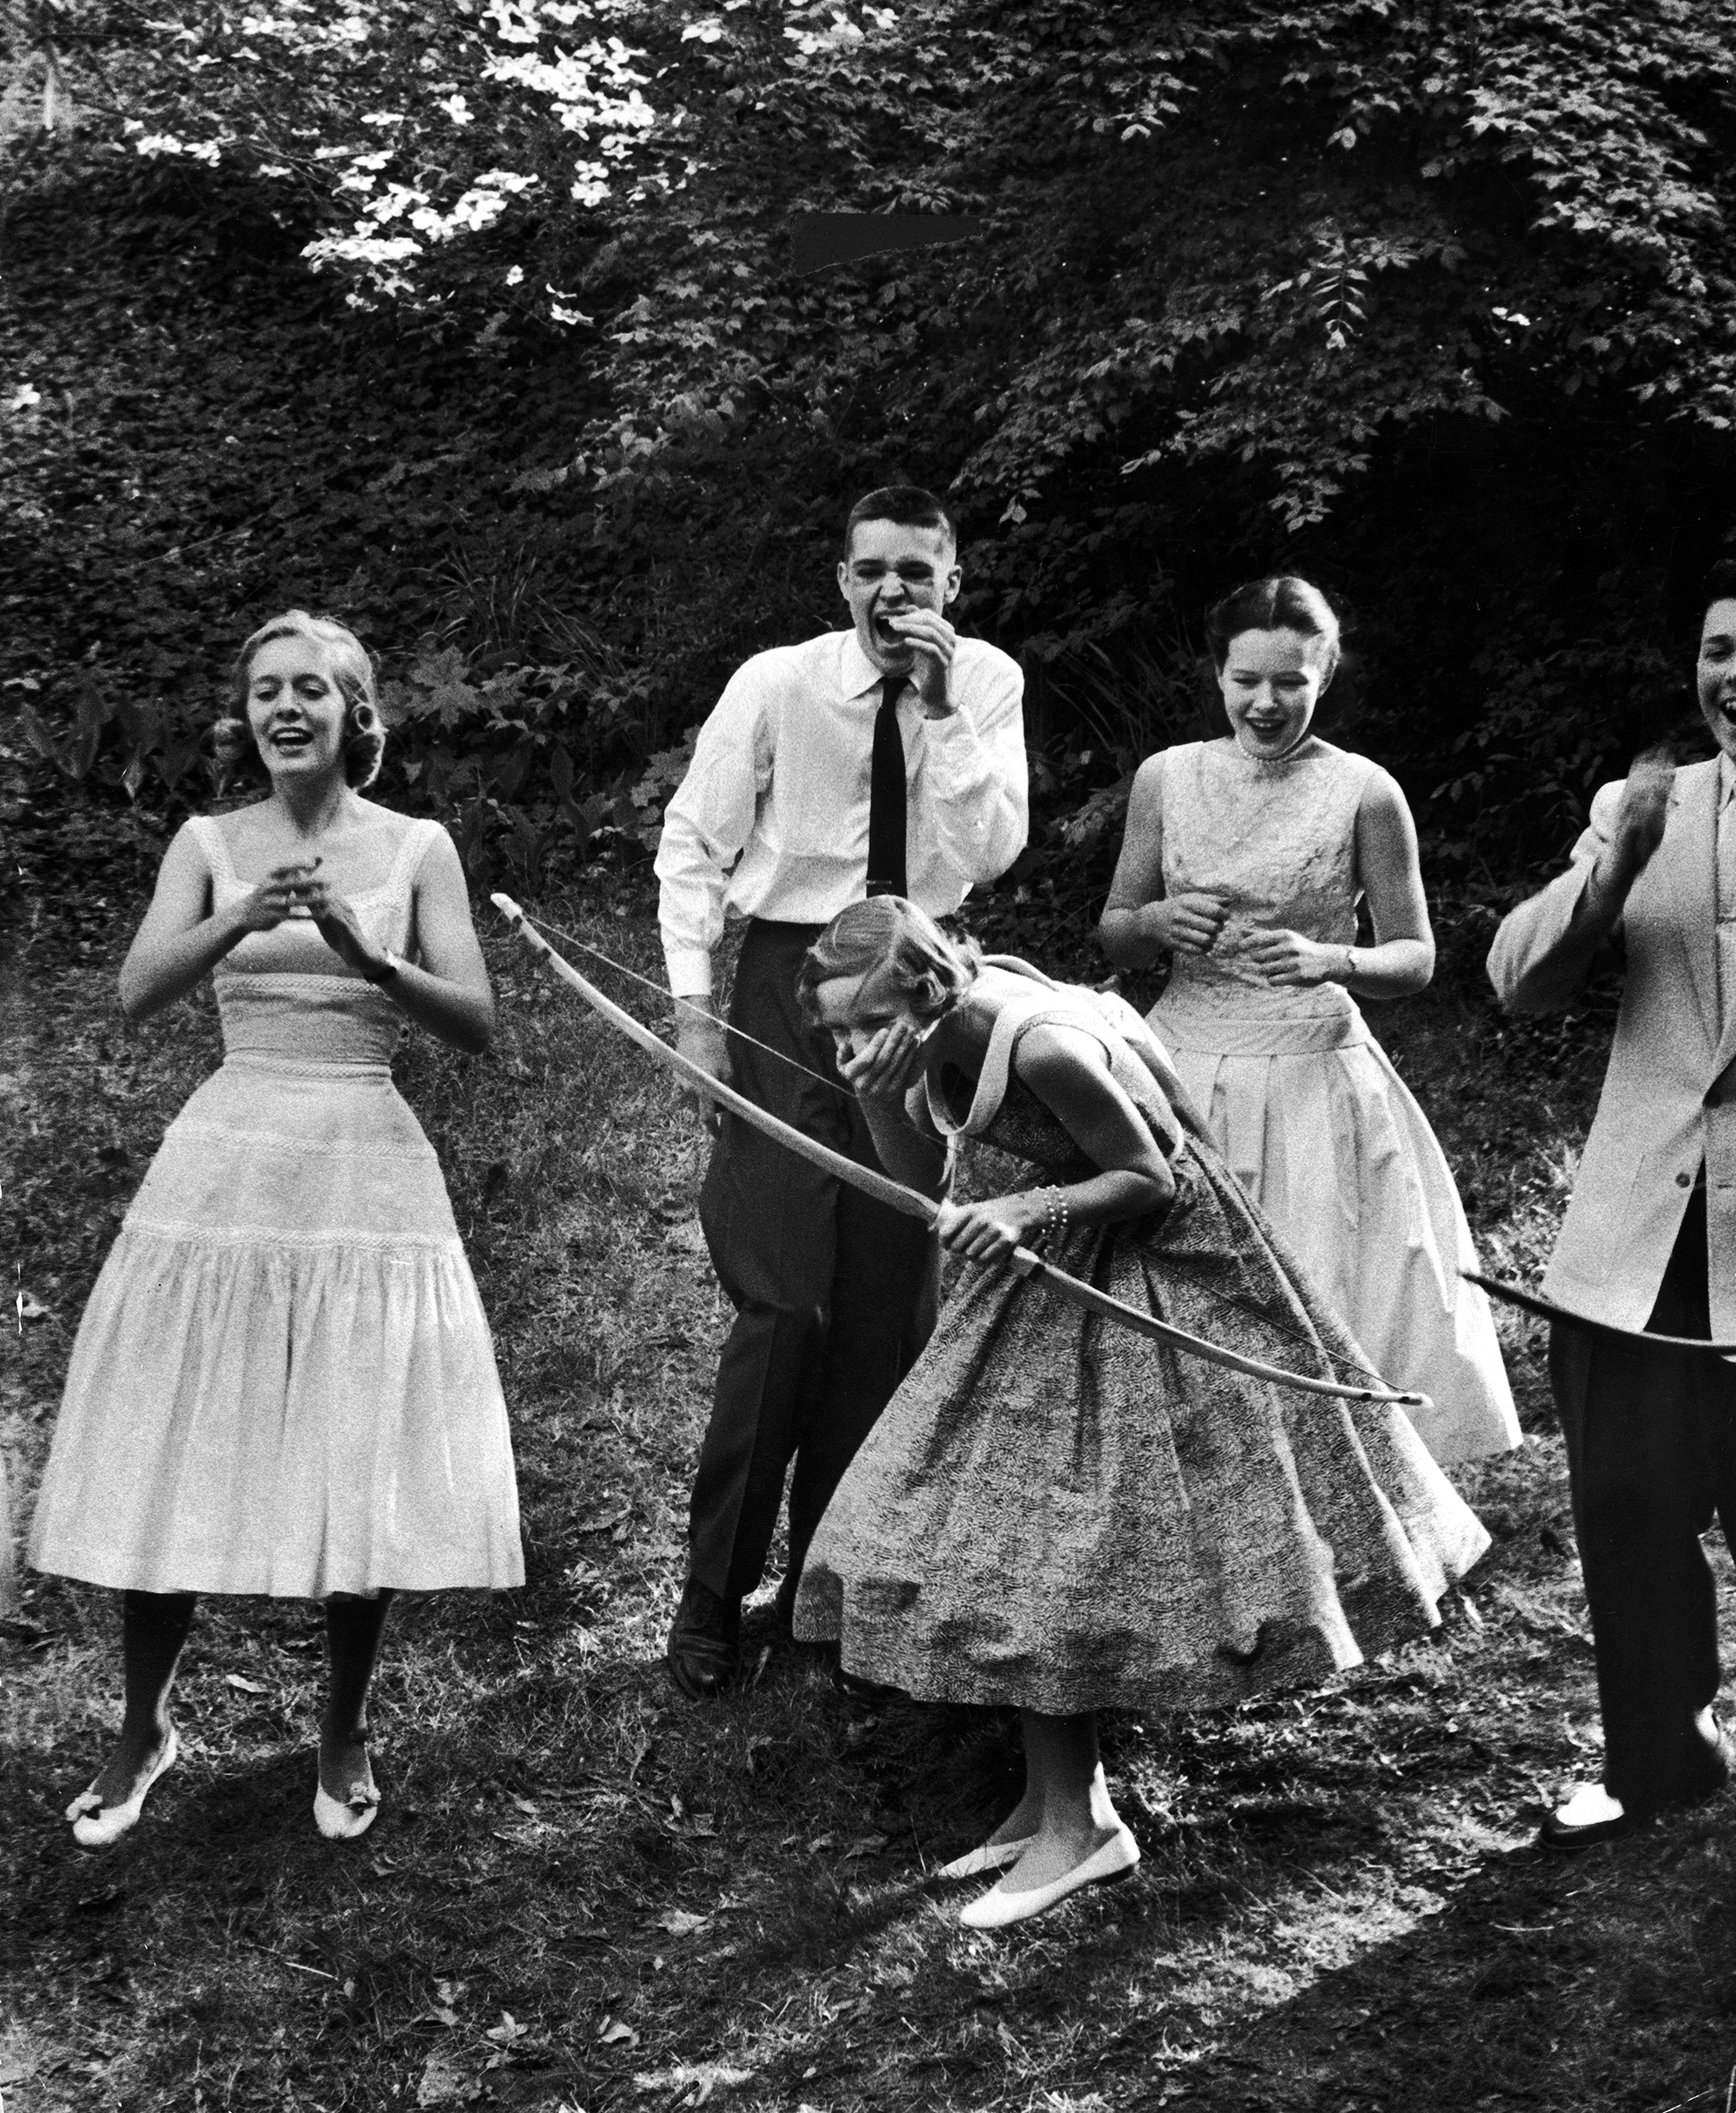 Archery providing entertainment for a group of friends at a teenage party, 1956.